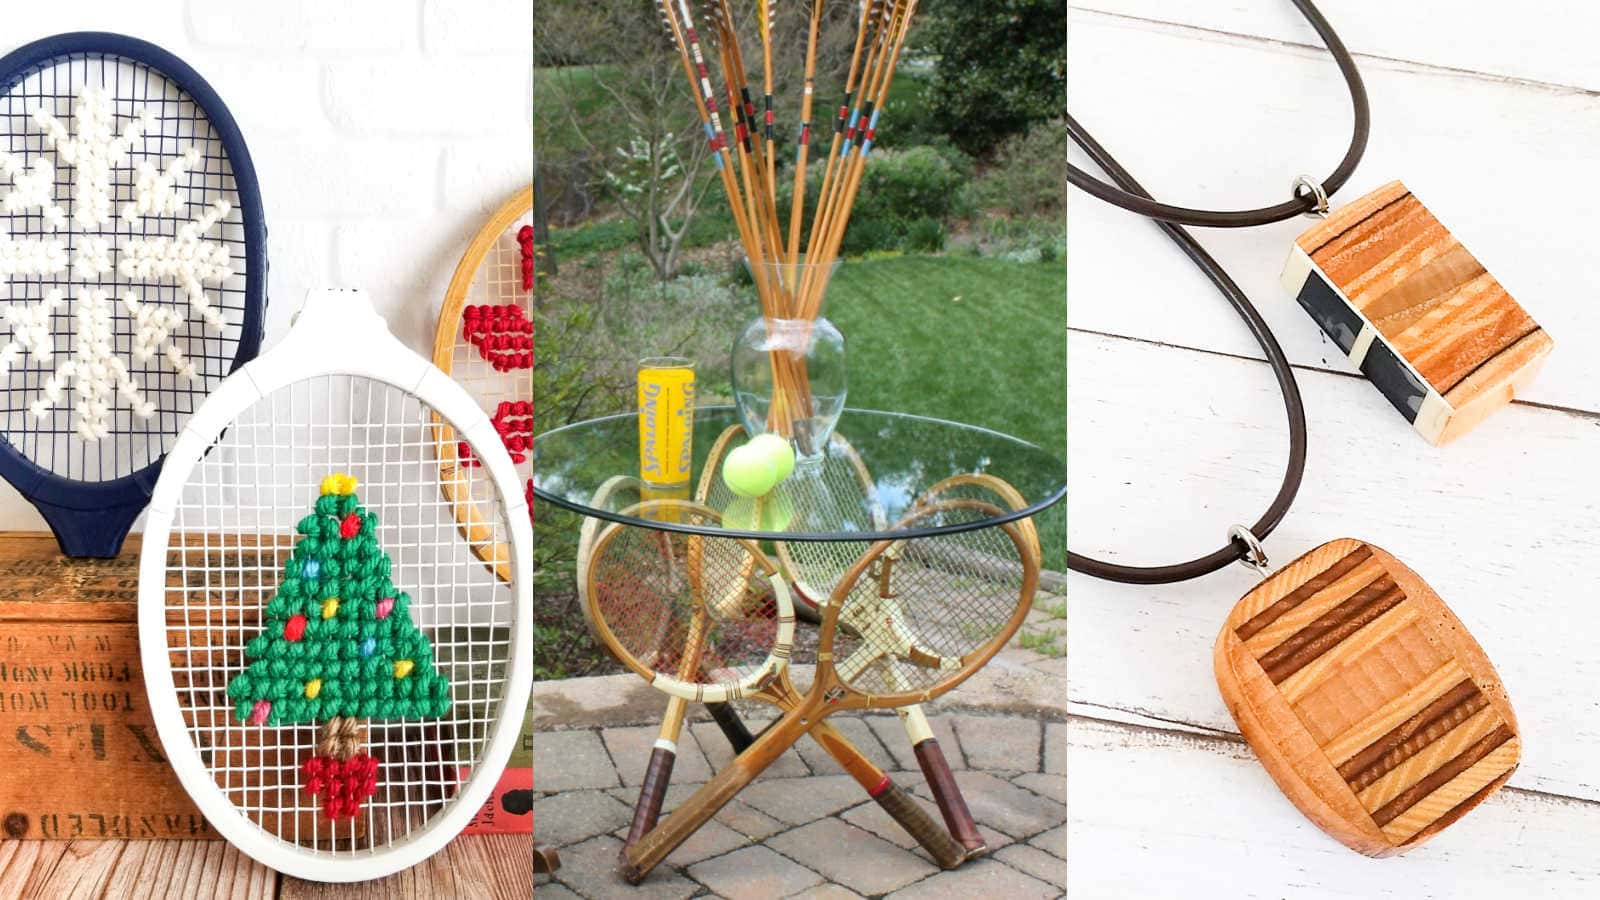 craft ideas for vintage tennis rackets